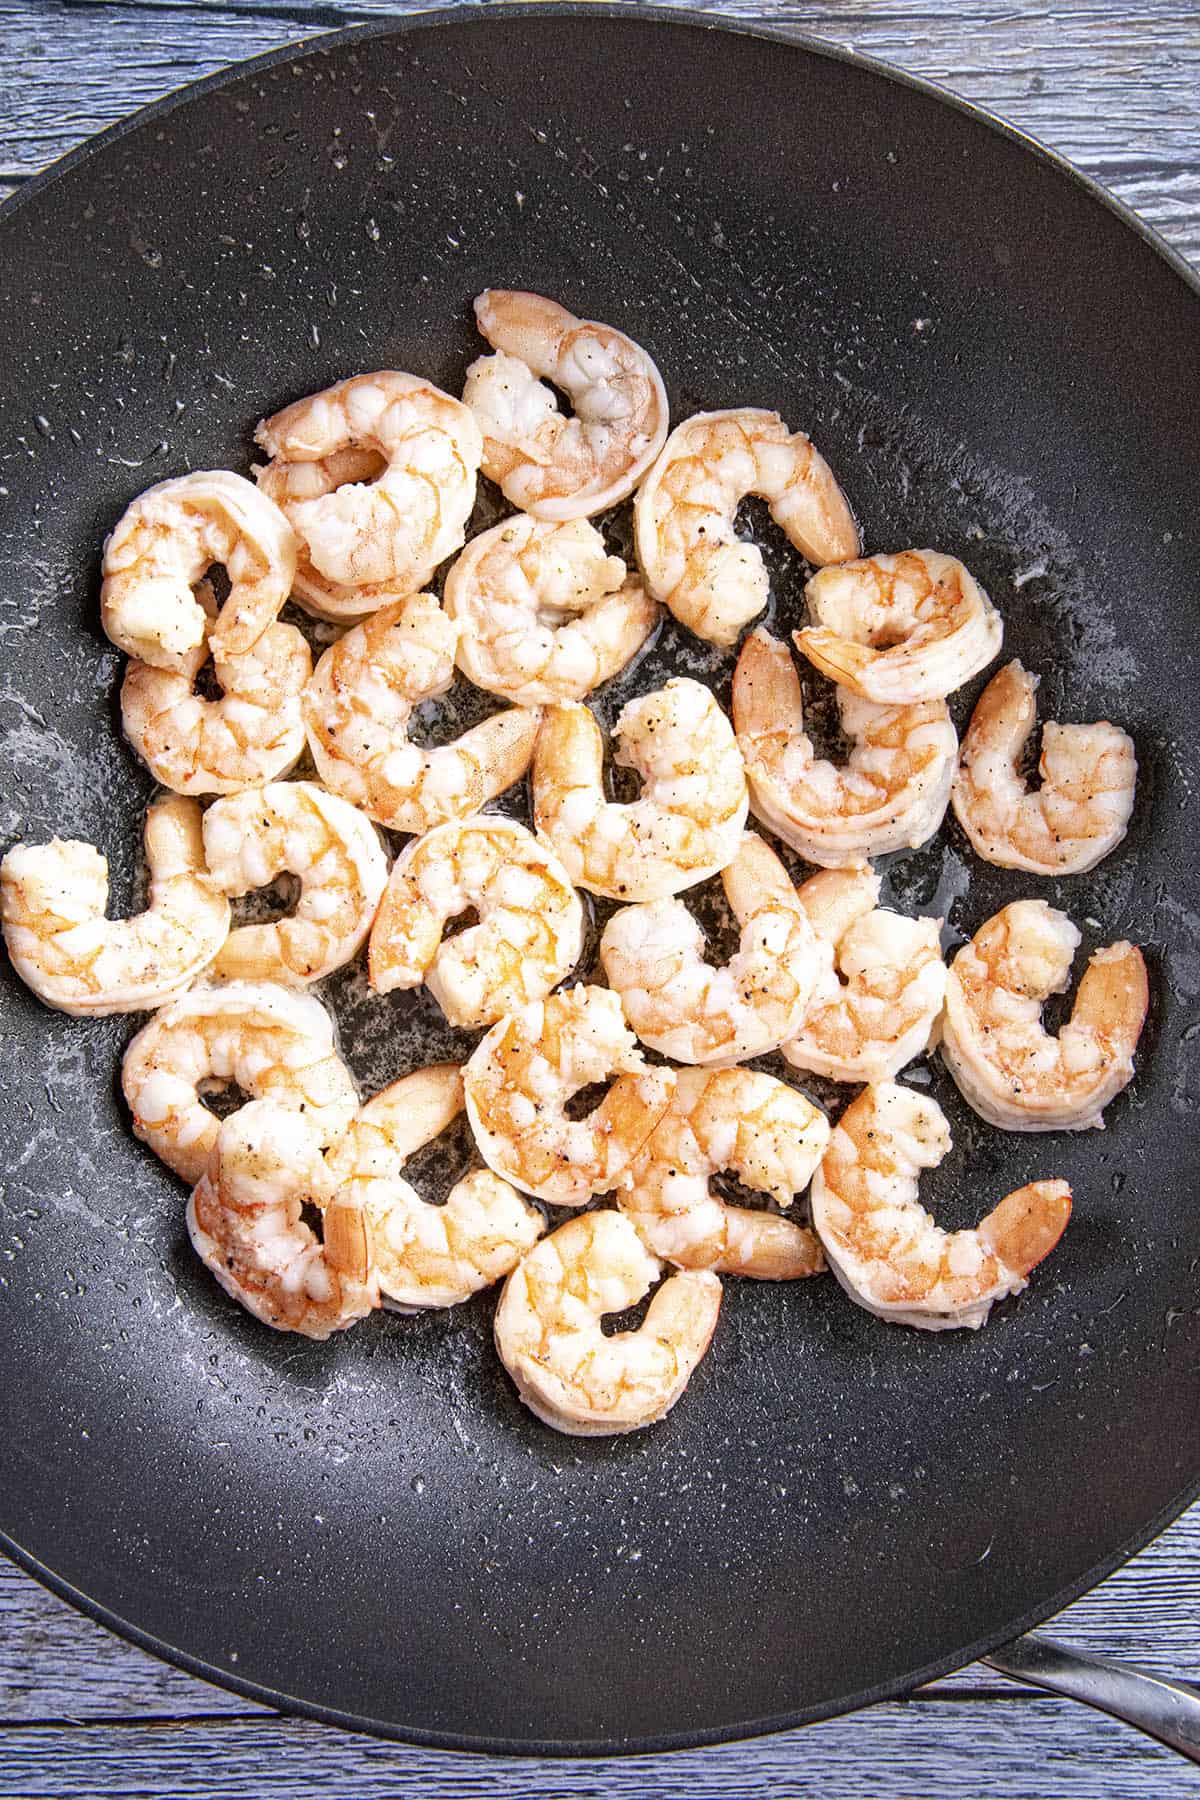 Cooking the shrimp in the wok